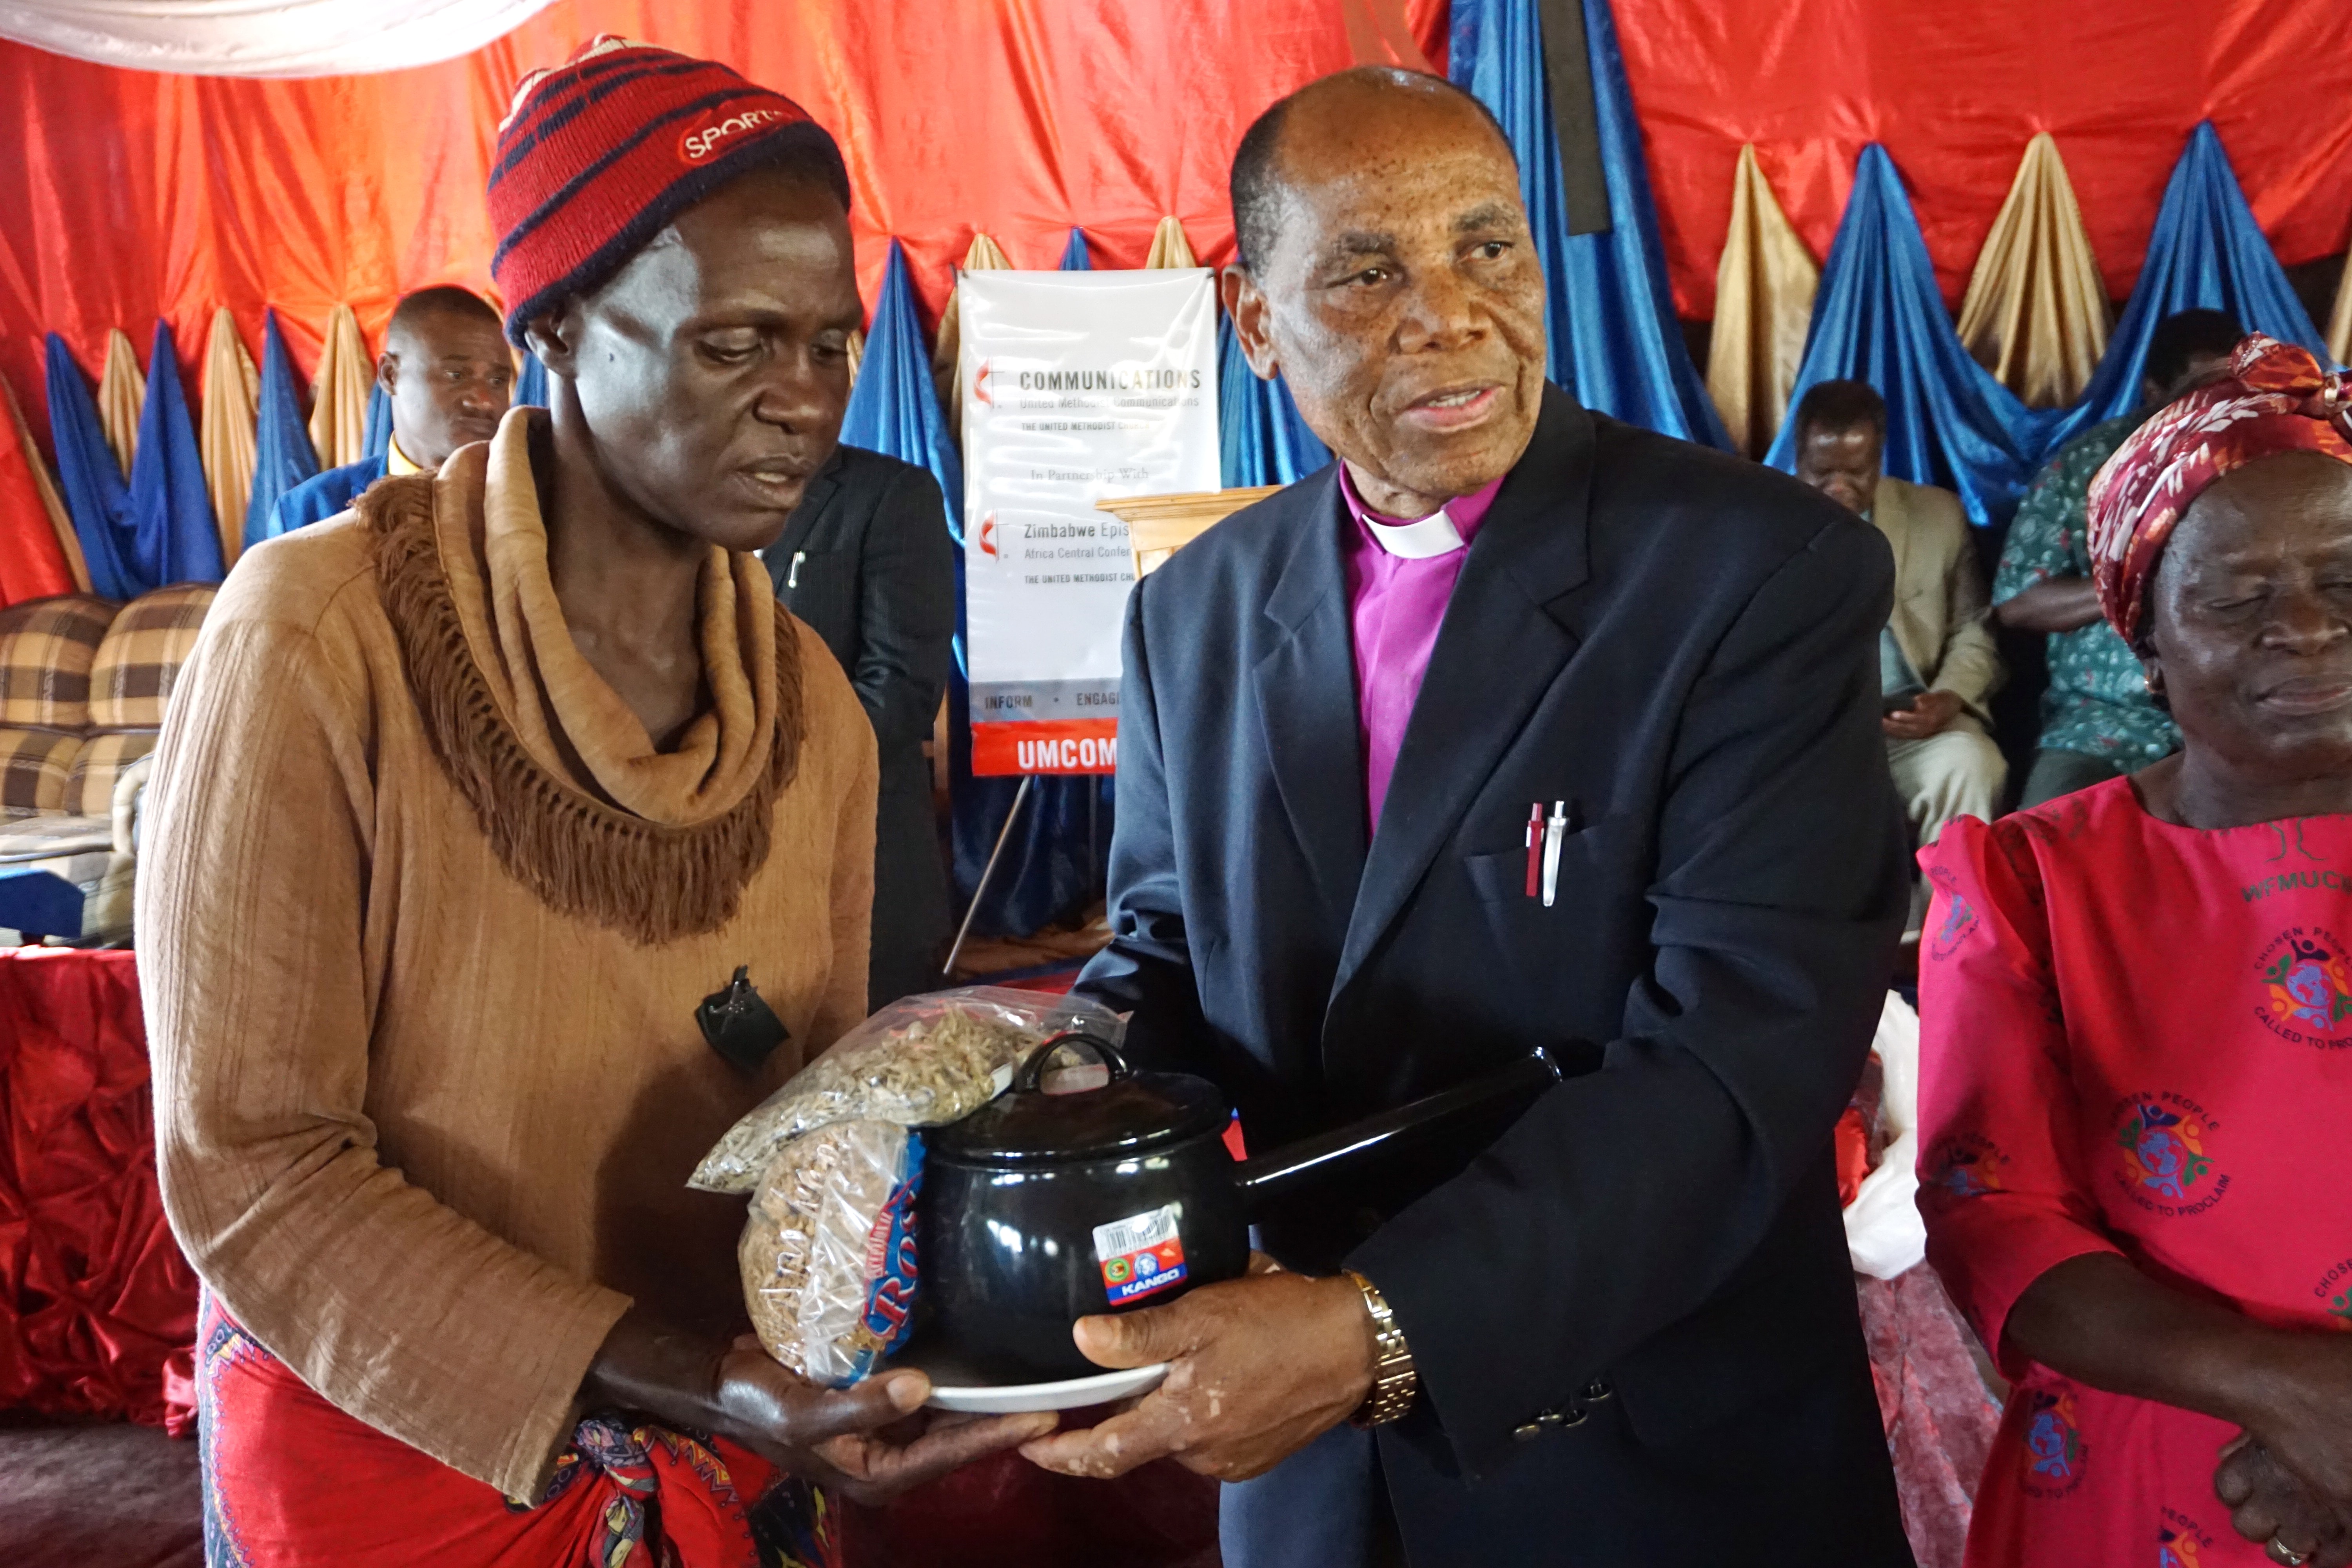 Cyclone survivor Josephine Mutambambishi receives supplies from Bishop Eben K. Nhiwatiwa in Ngangu, Zimbabwe. The bishop and other church leaders visited the hard-hit area in the Chimanimani District in late April. Photo by Kudzai Chingwe, UMNS.